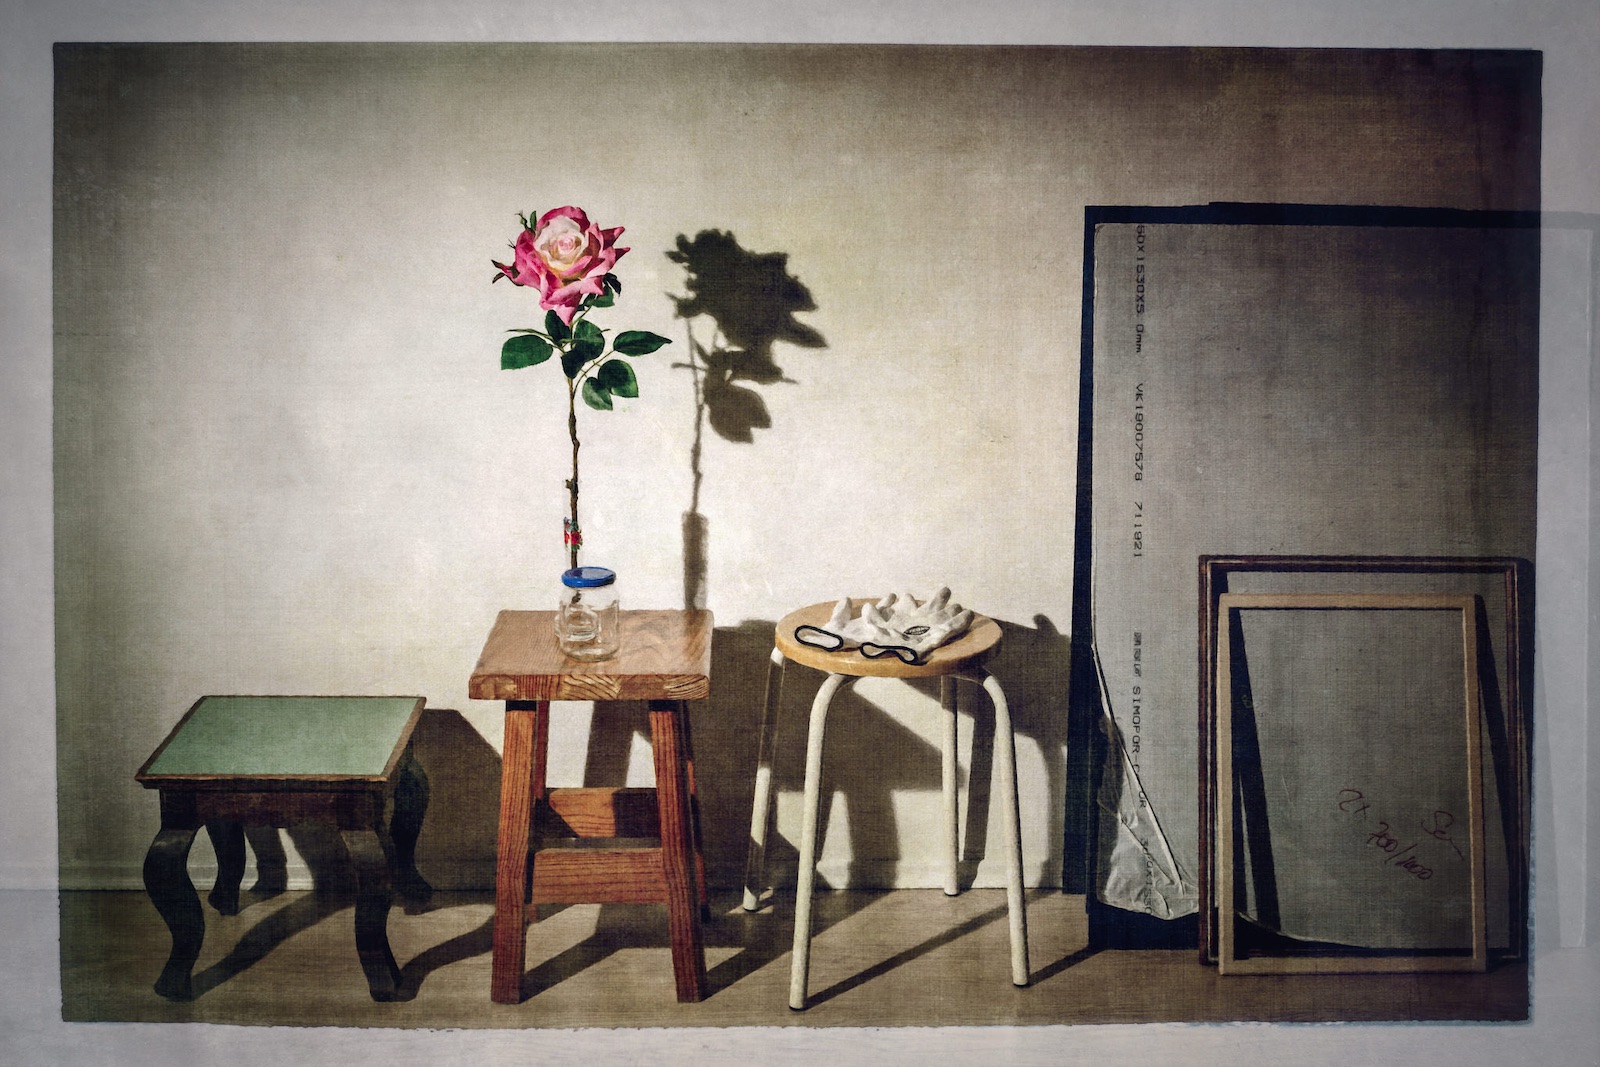 Studio Still Life With Rose And Gloves - Painterly Photograph by Martin Nienberg